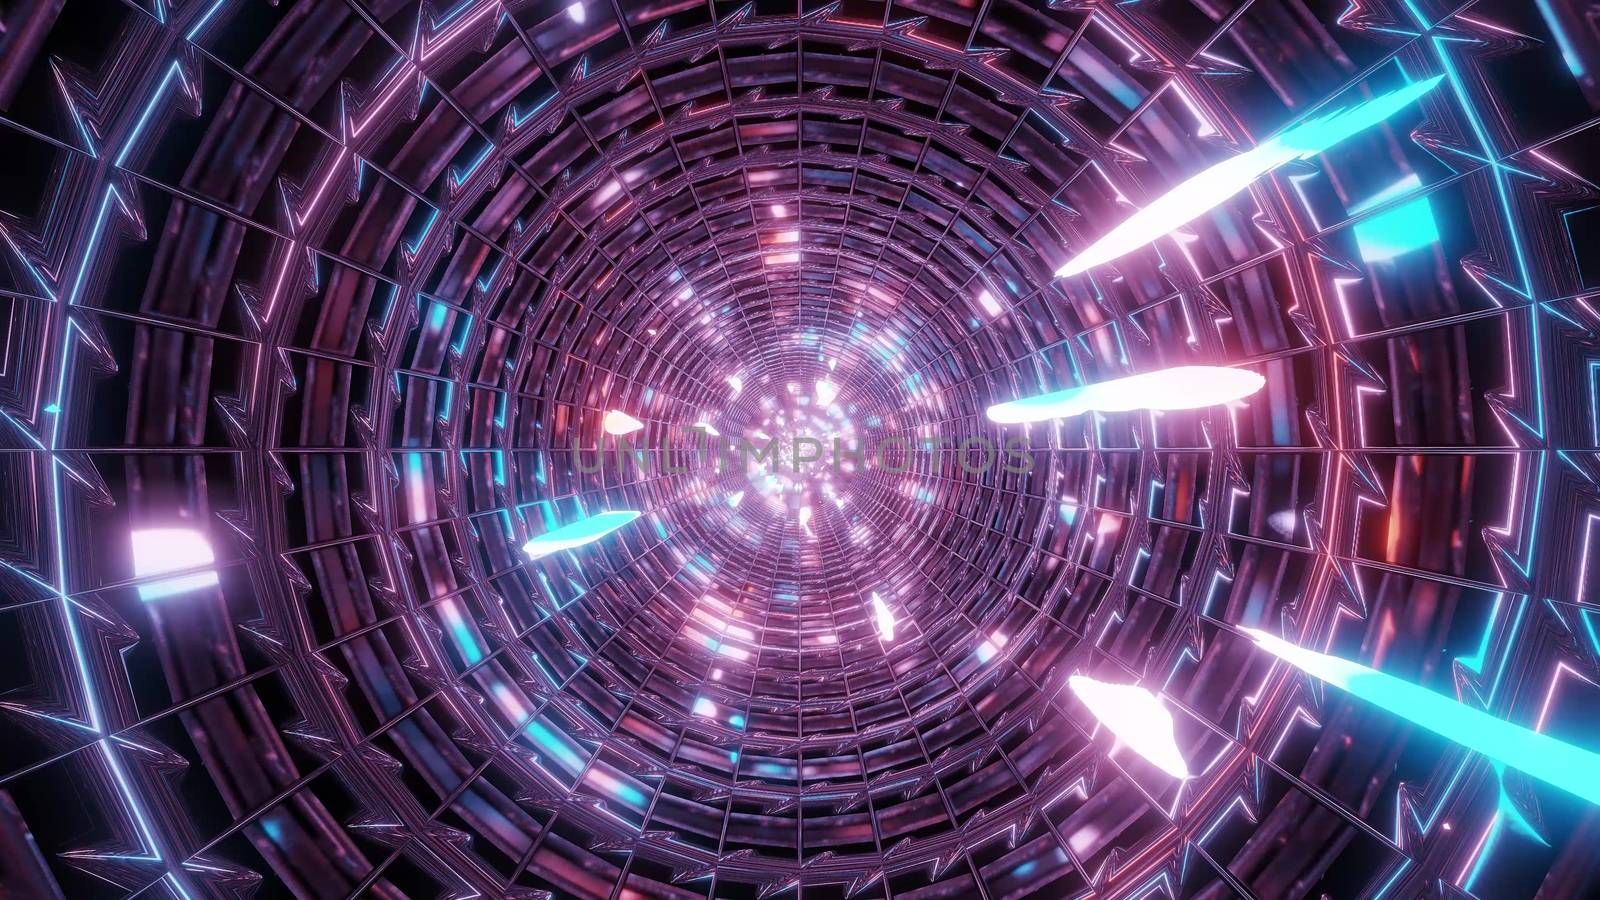 abstract metal tunnel with colorful reflection 3d illustration background wallpaper by tunnelmotions